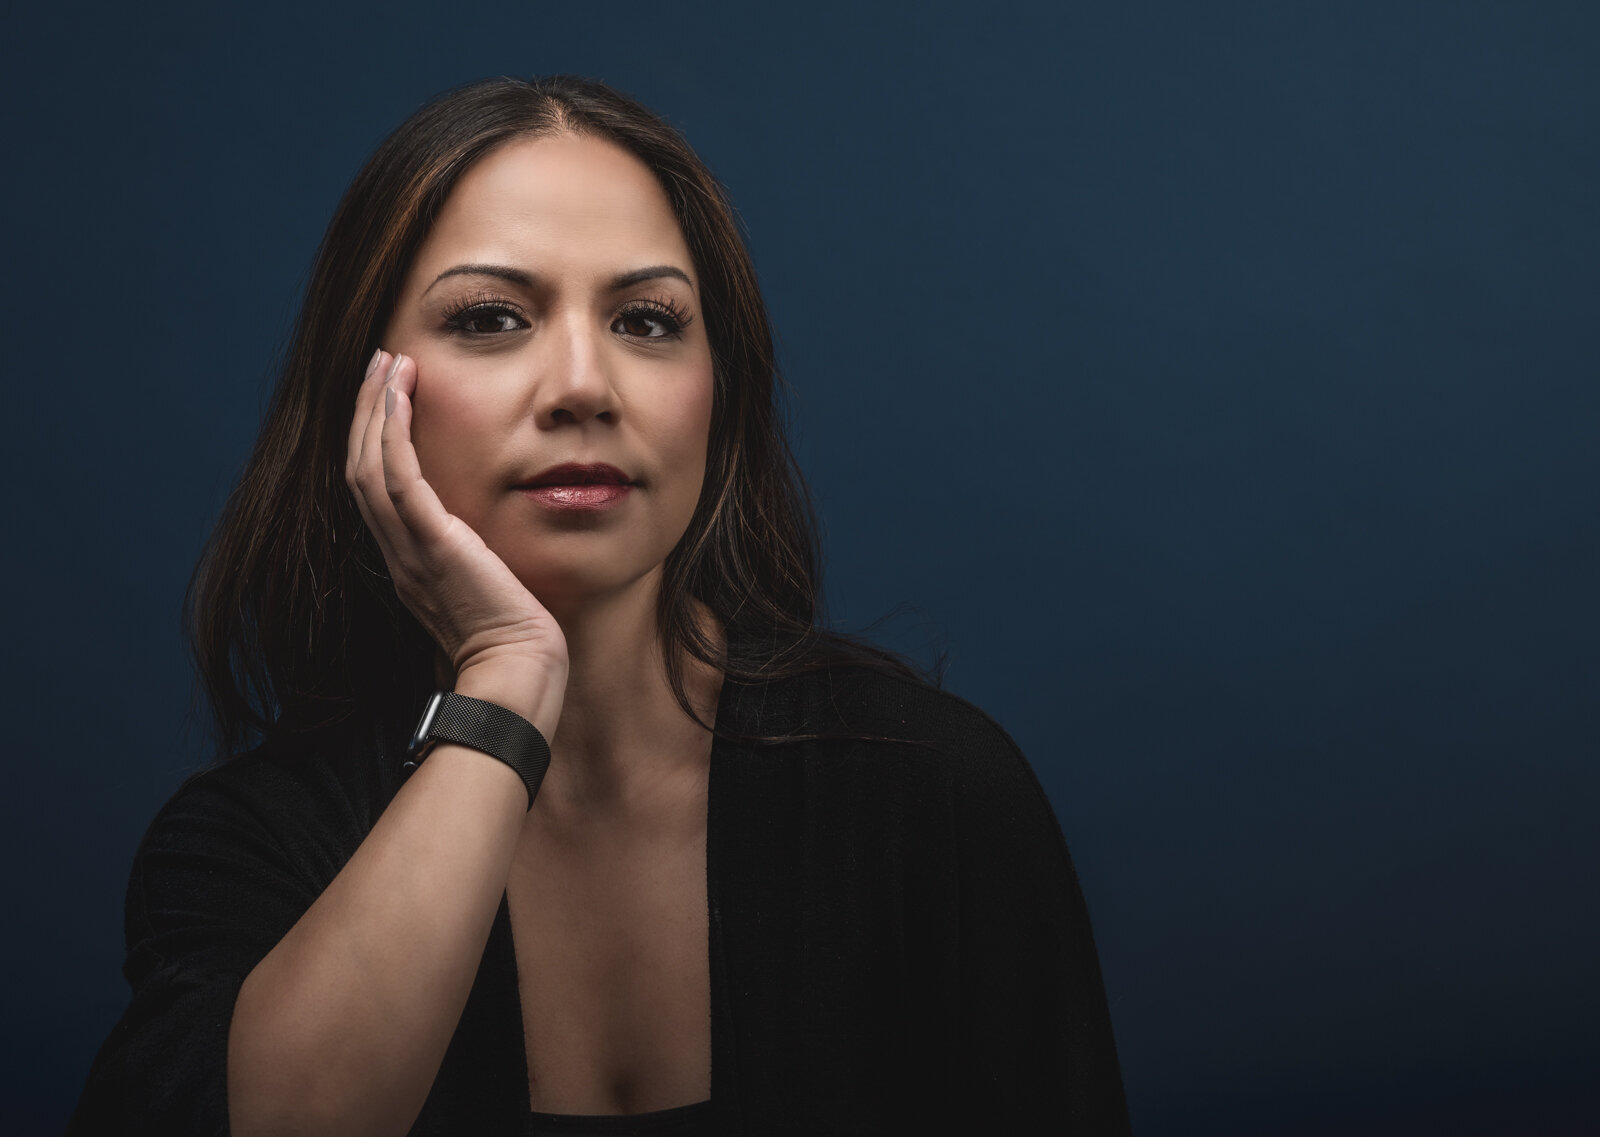 Woman sits with her right hand resting on her face wearing a black top against a navy background for a headshot session in Oakland, CA